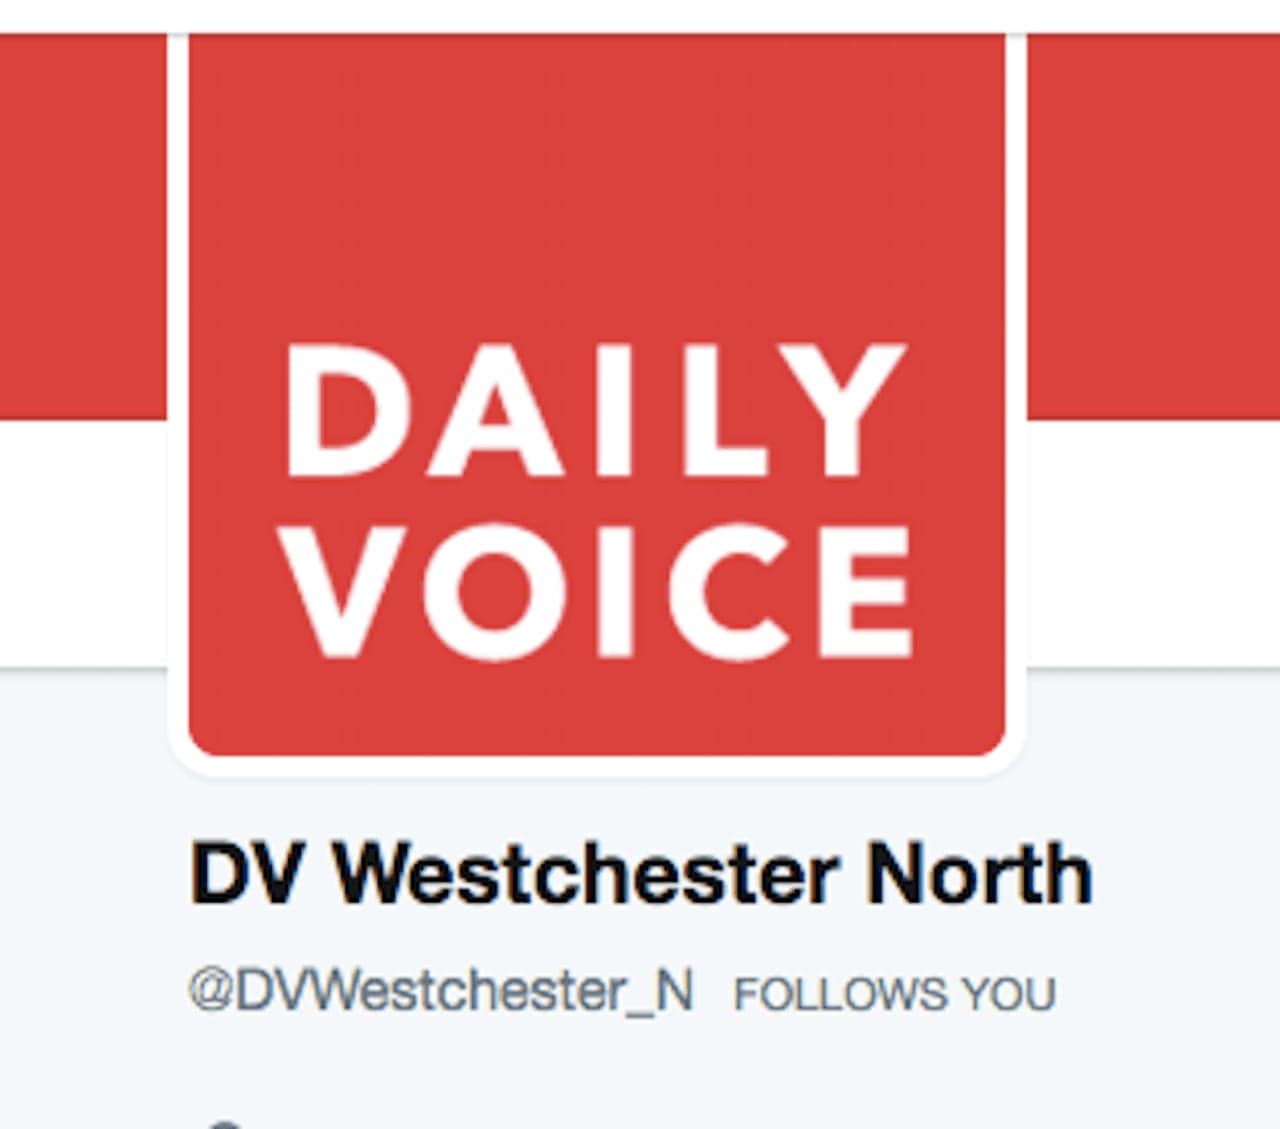 Daily Voice Northern Westchester Twitter feed.